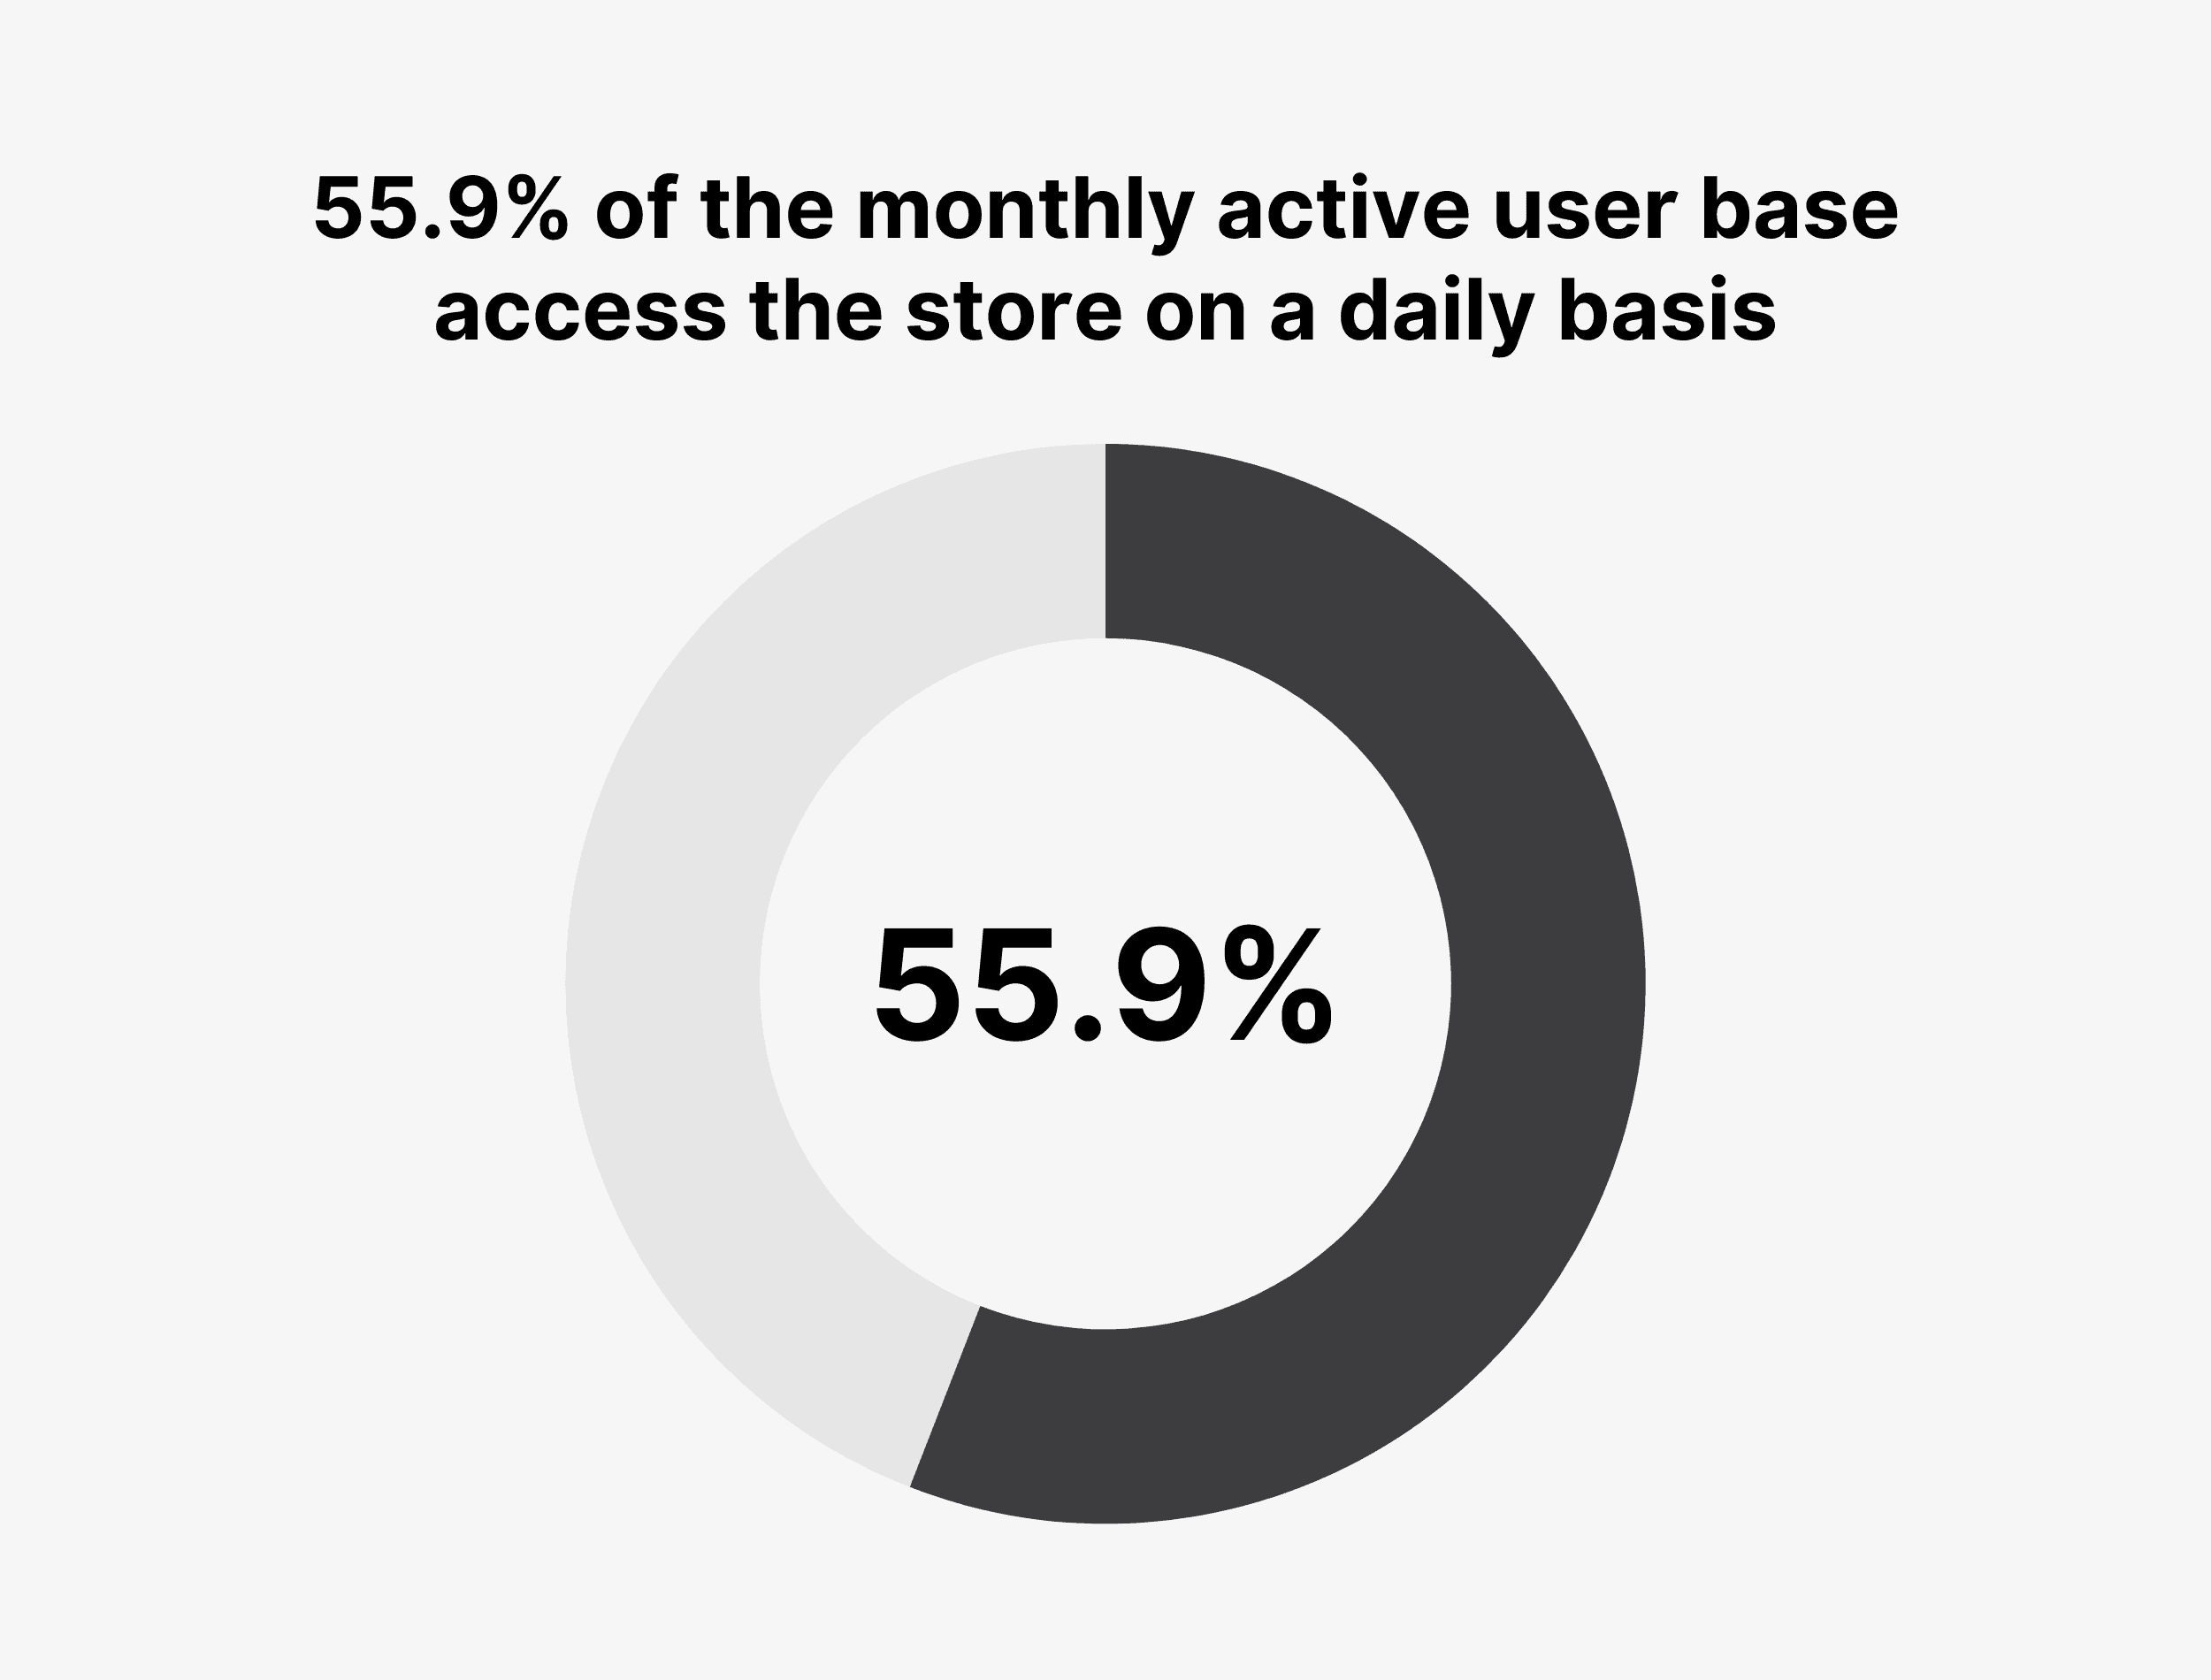 55.9% of the monthly active user base access the store on a daily basis